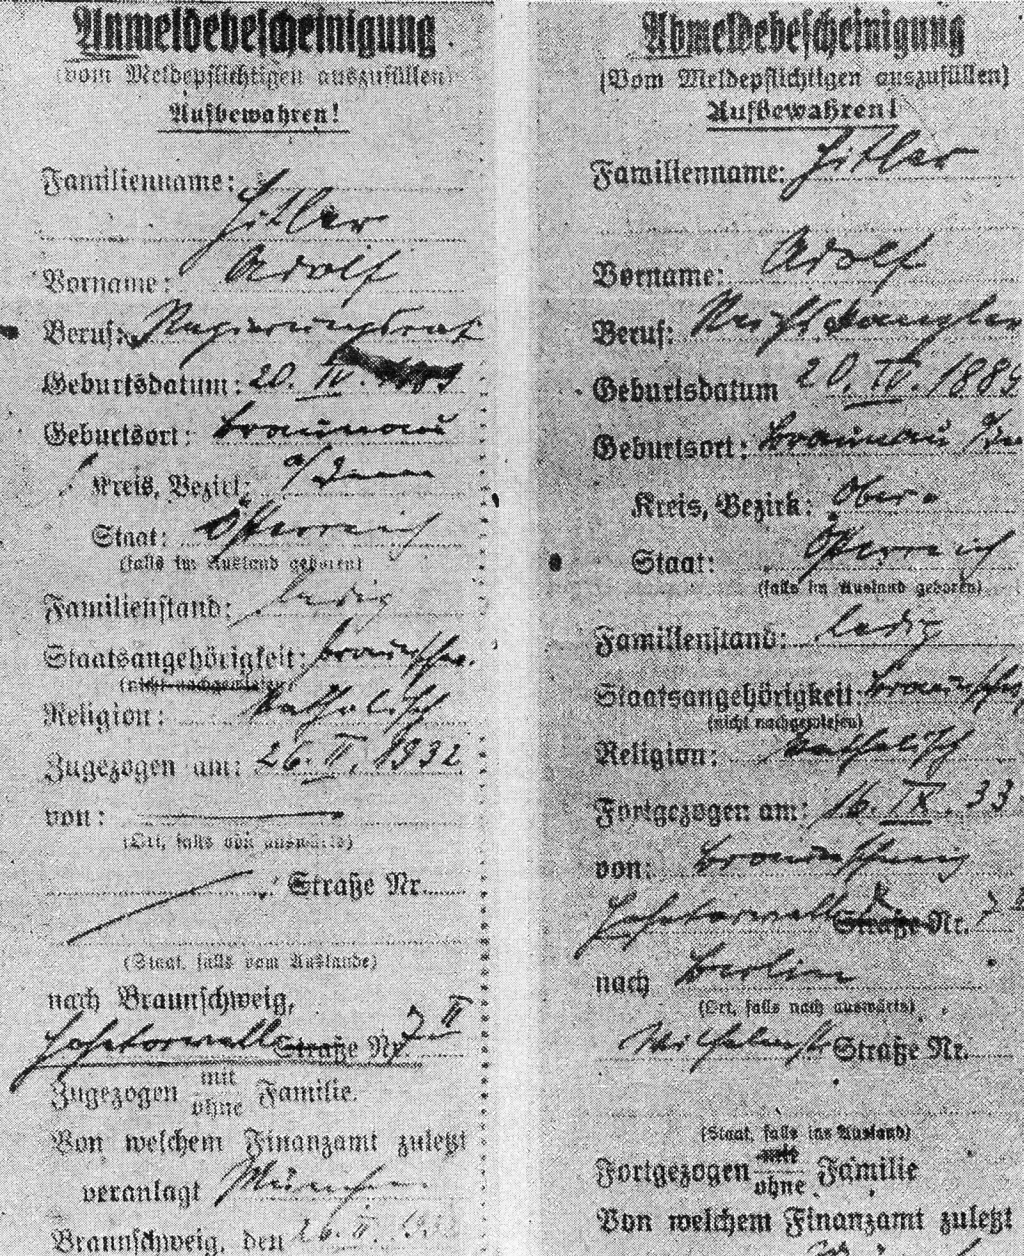 Adolf Hitler had renounced his Austrian citizenship in 1925. After years of being stateless, Wilhelm Frick managed to appoint him as a Braunschweig government official that came with automatic German citizenship, allowing to take part of the elections.